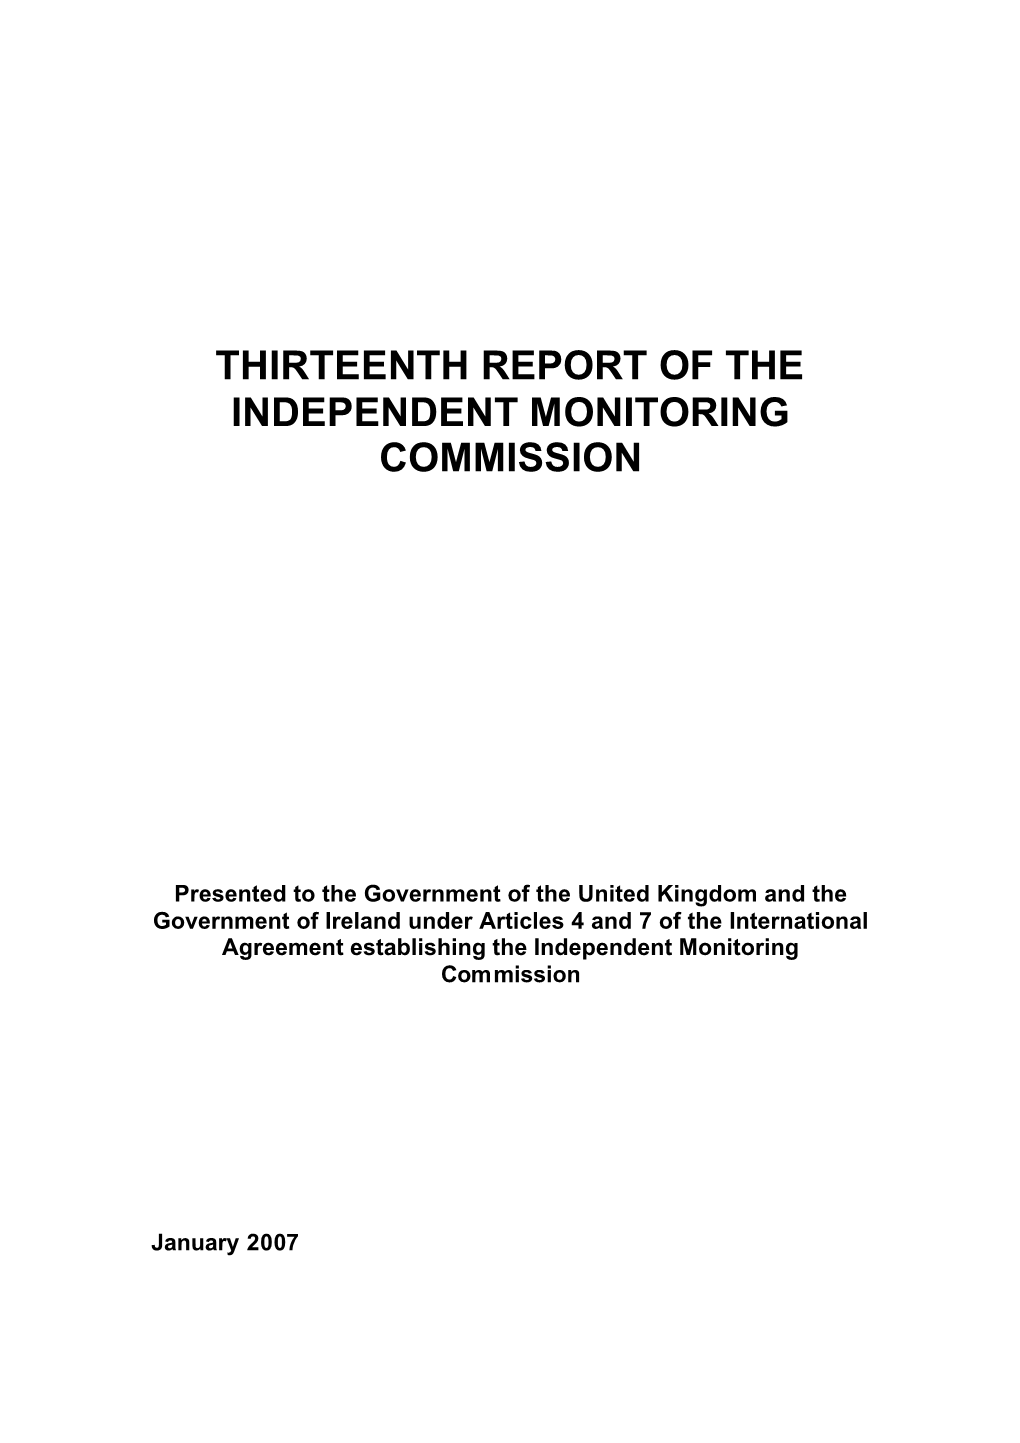 Thirteenth Report of the Independent Monitoring Commission (PDF